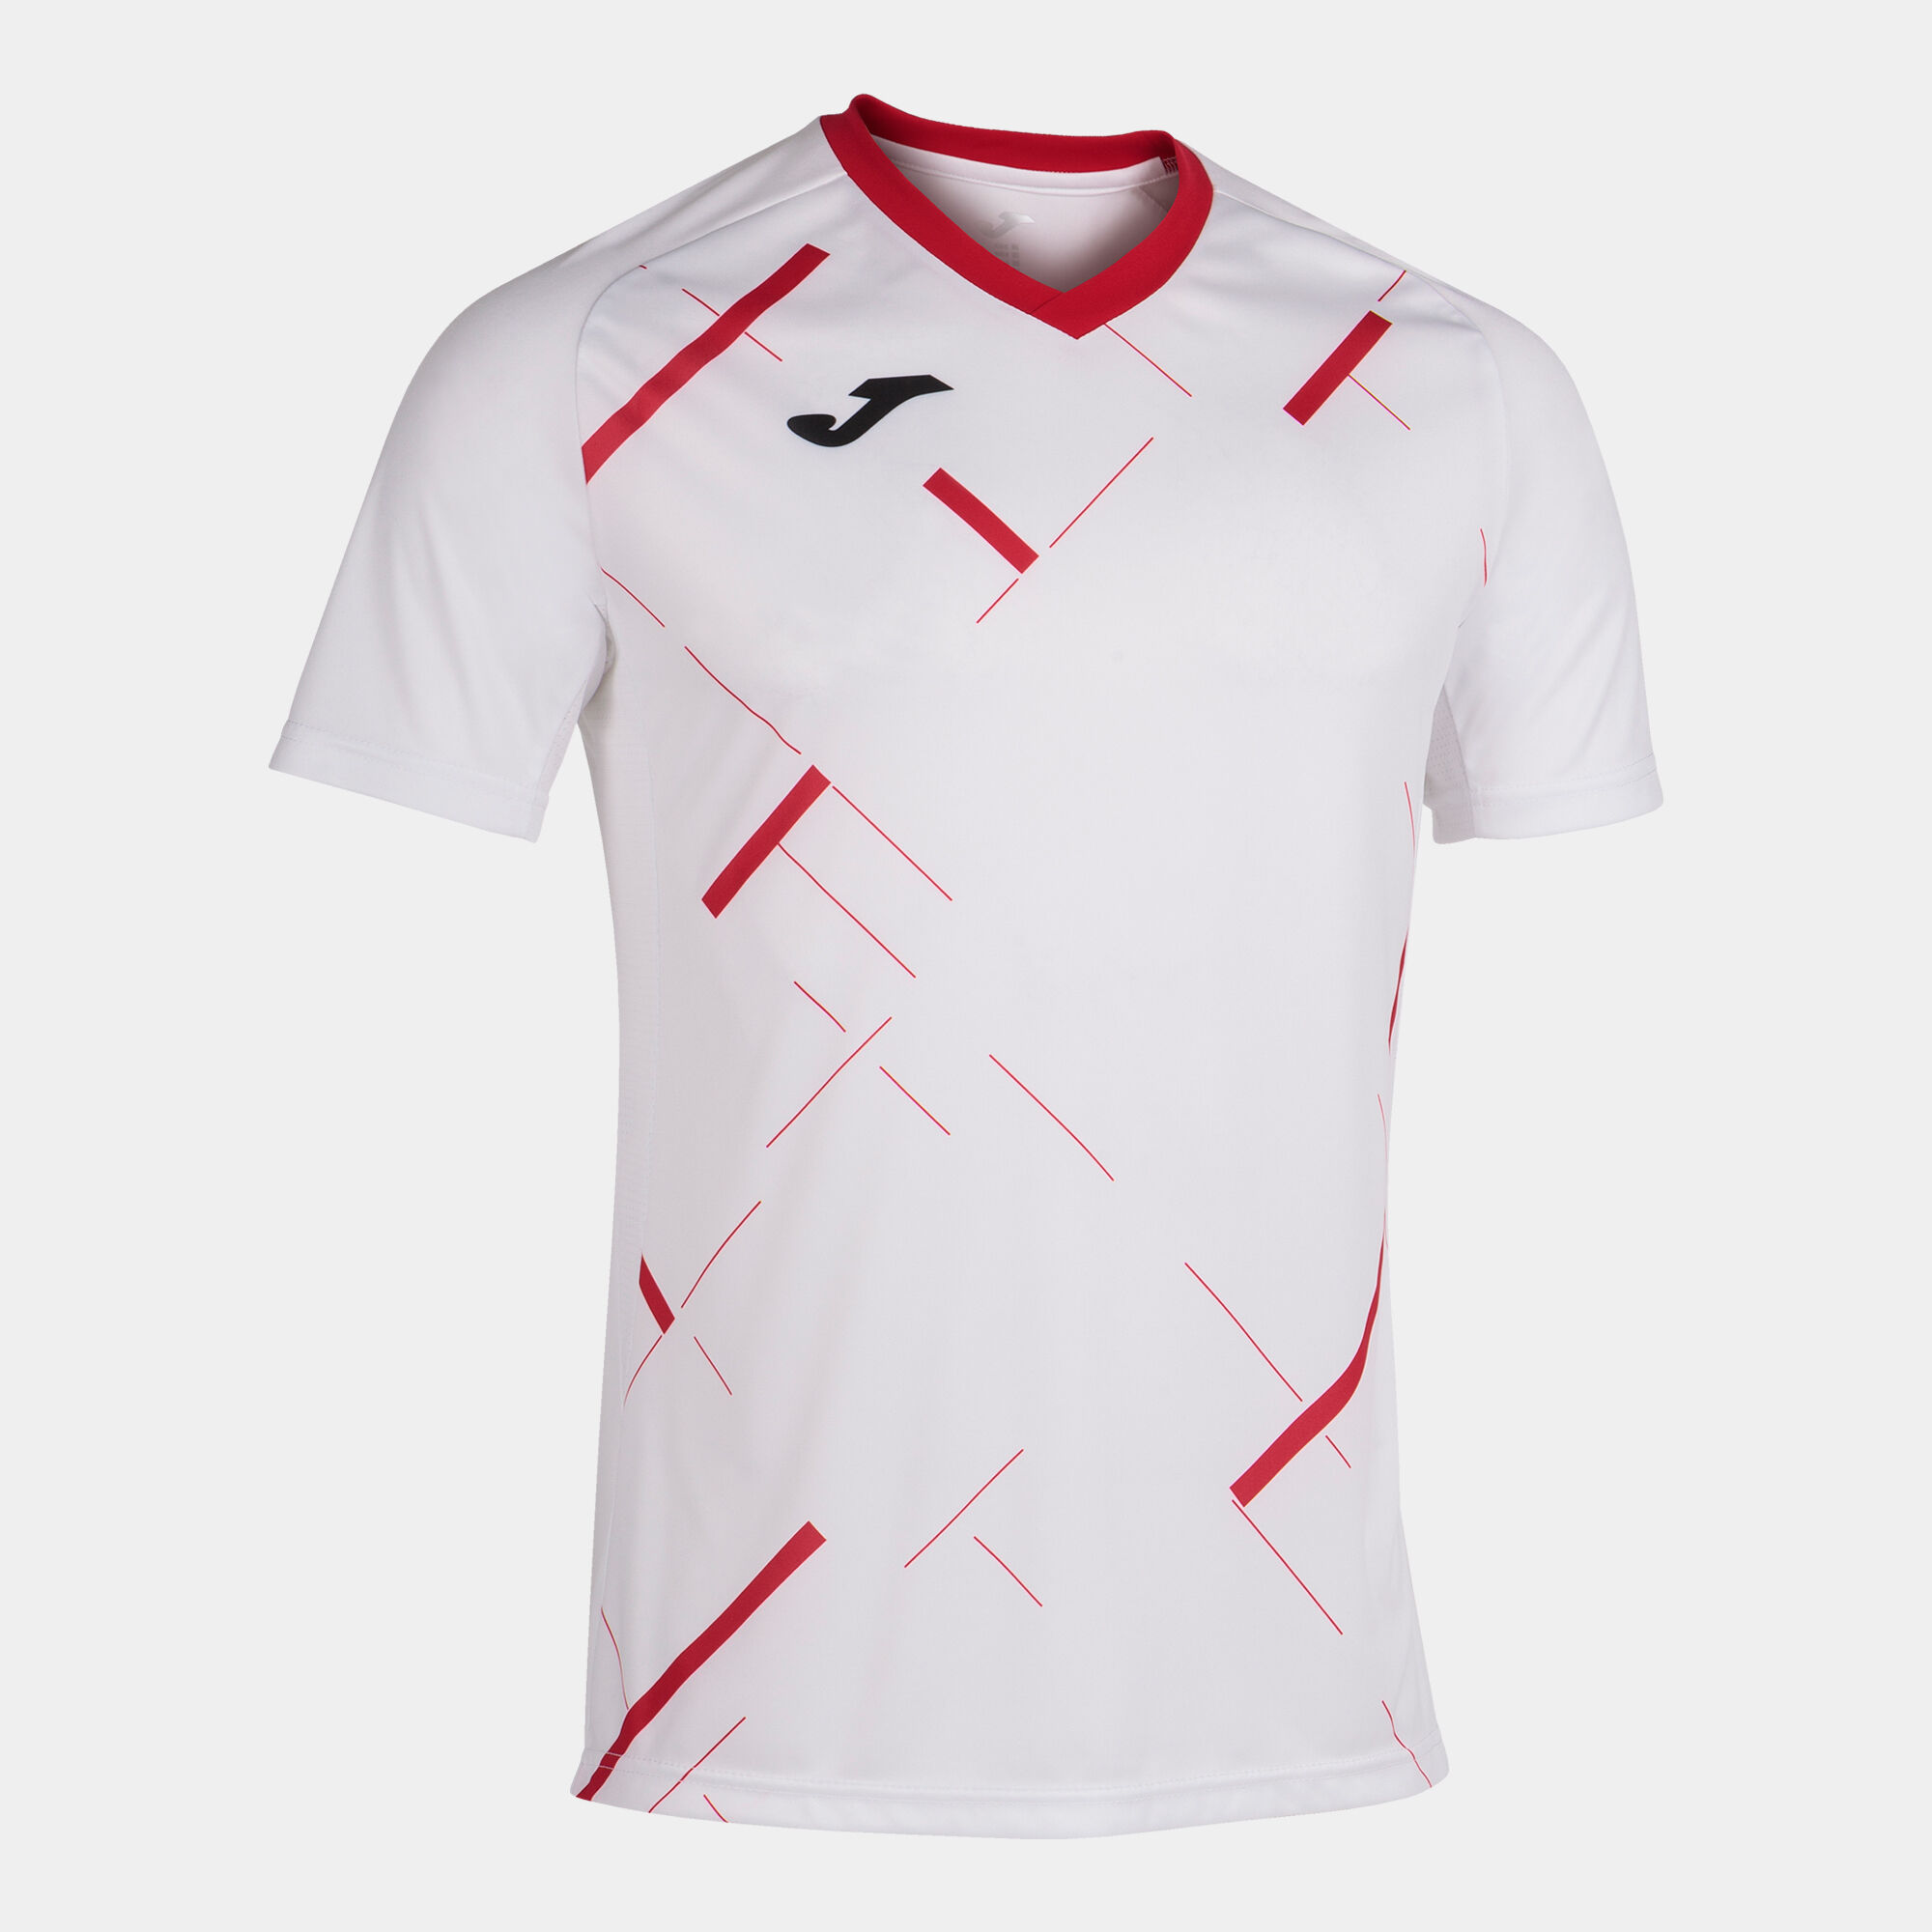 Maillot manches courtes homme Tiger III blanc rouge